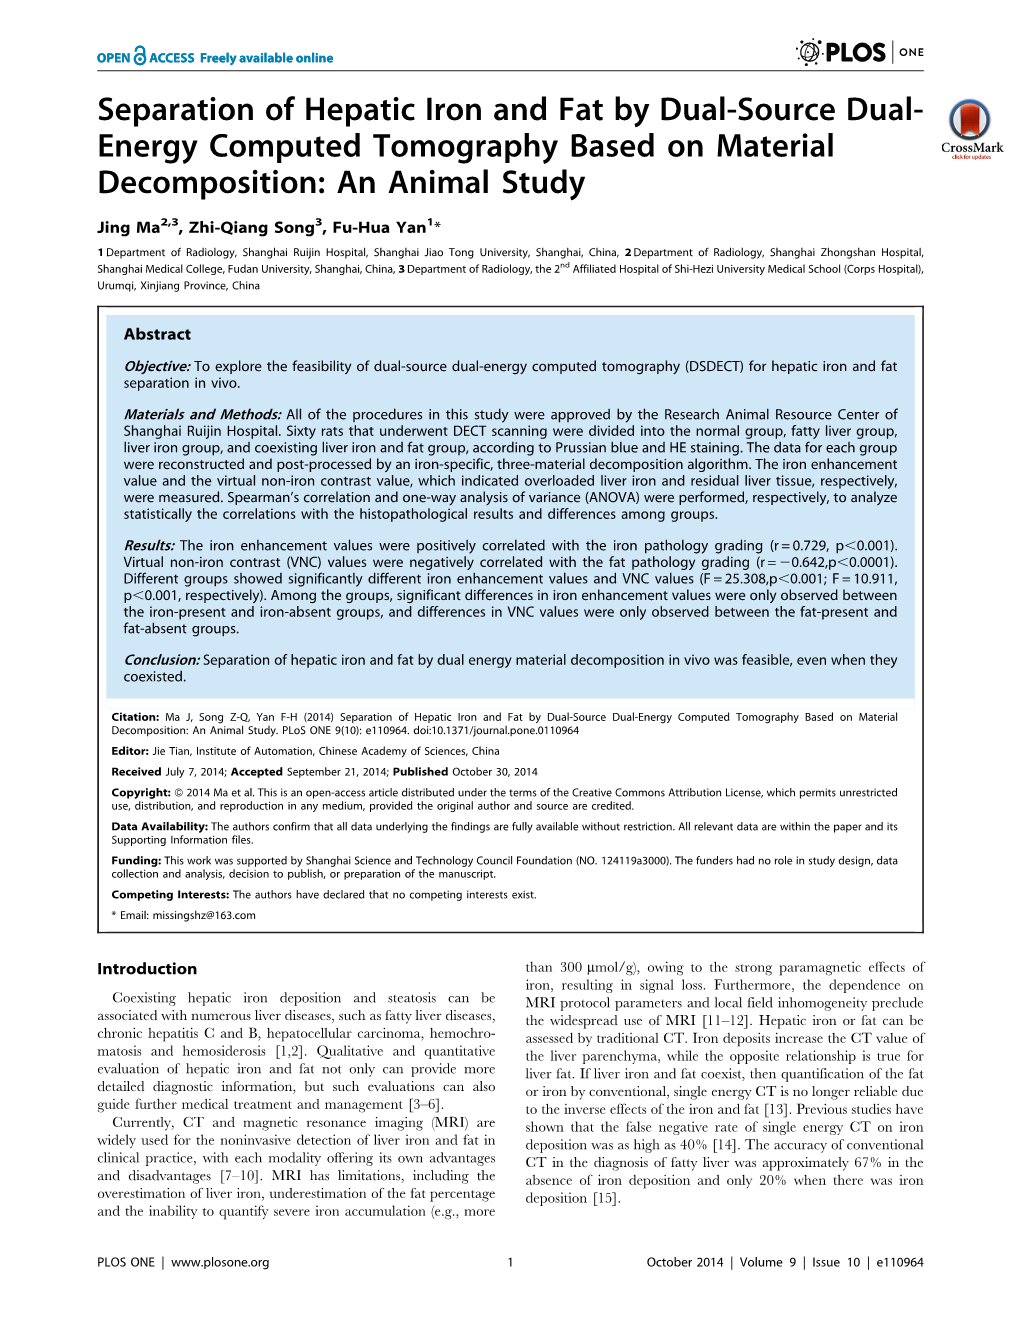 Separation of Hepatic Iron and Fat by Dual-Source Dual-Energy Computed Tomography Based on Material Decomposition: an Animal Study